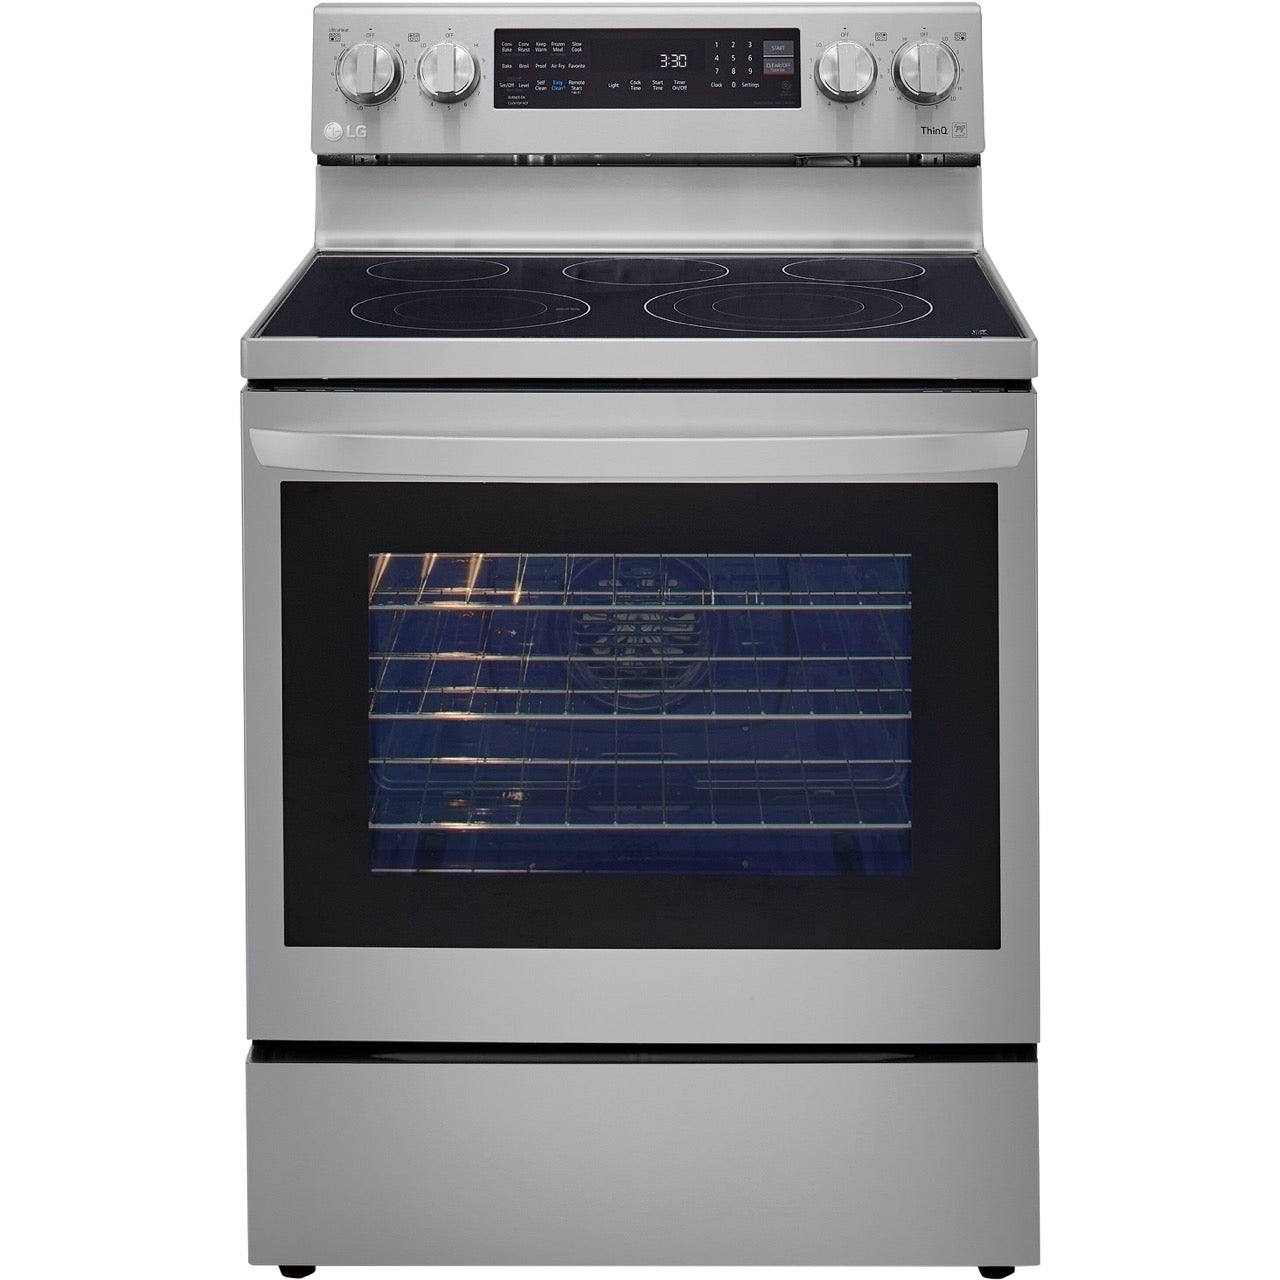 LG 6.3-Cu. Ft. Electric Smart Range with InstaView and AirFry, Stainless Steel (LREL6325F)